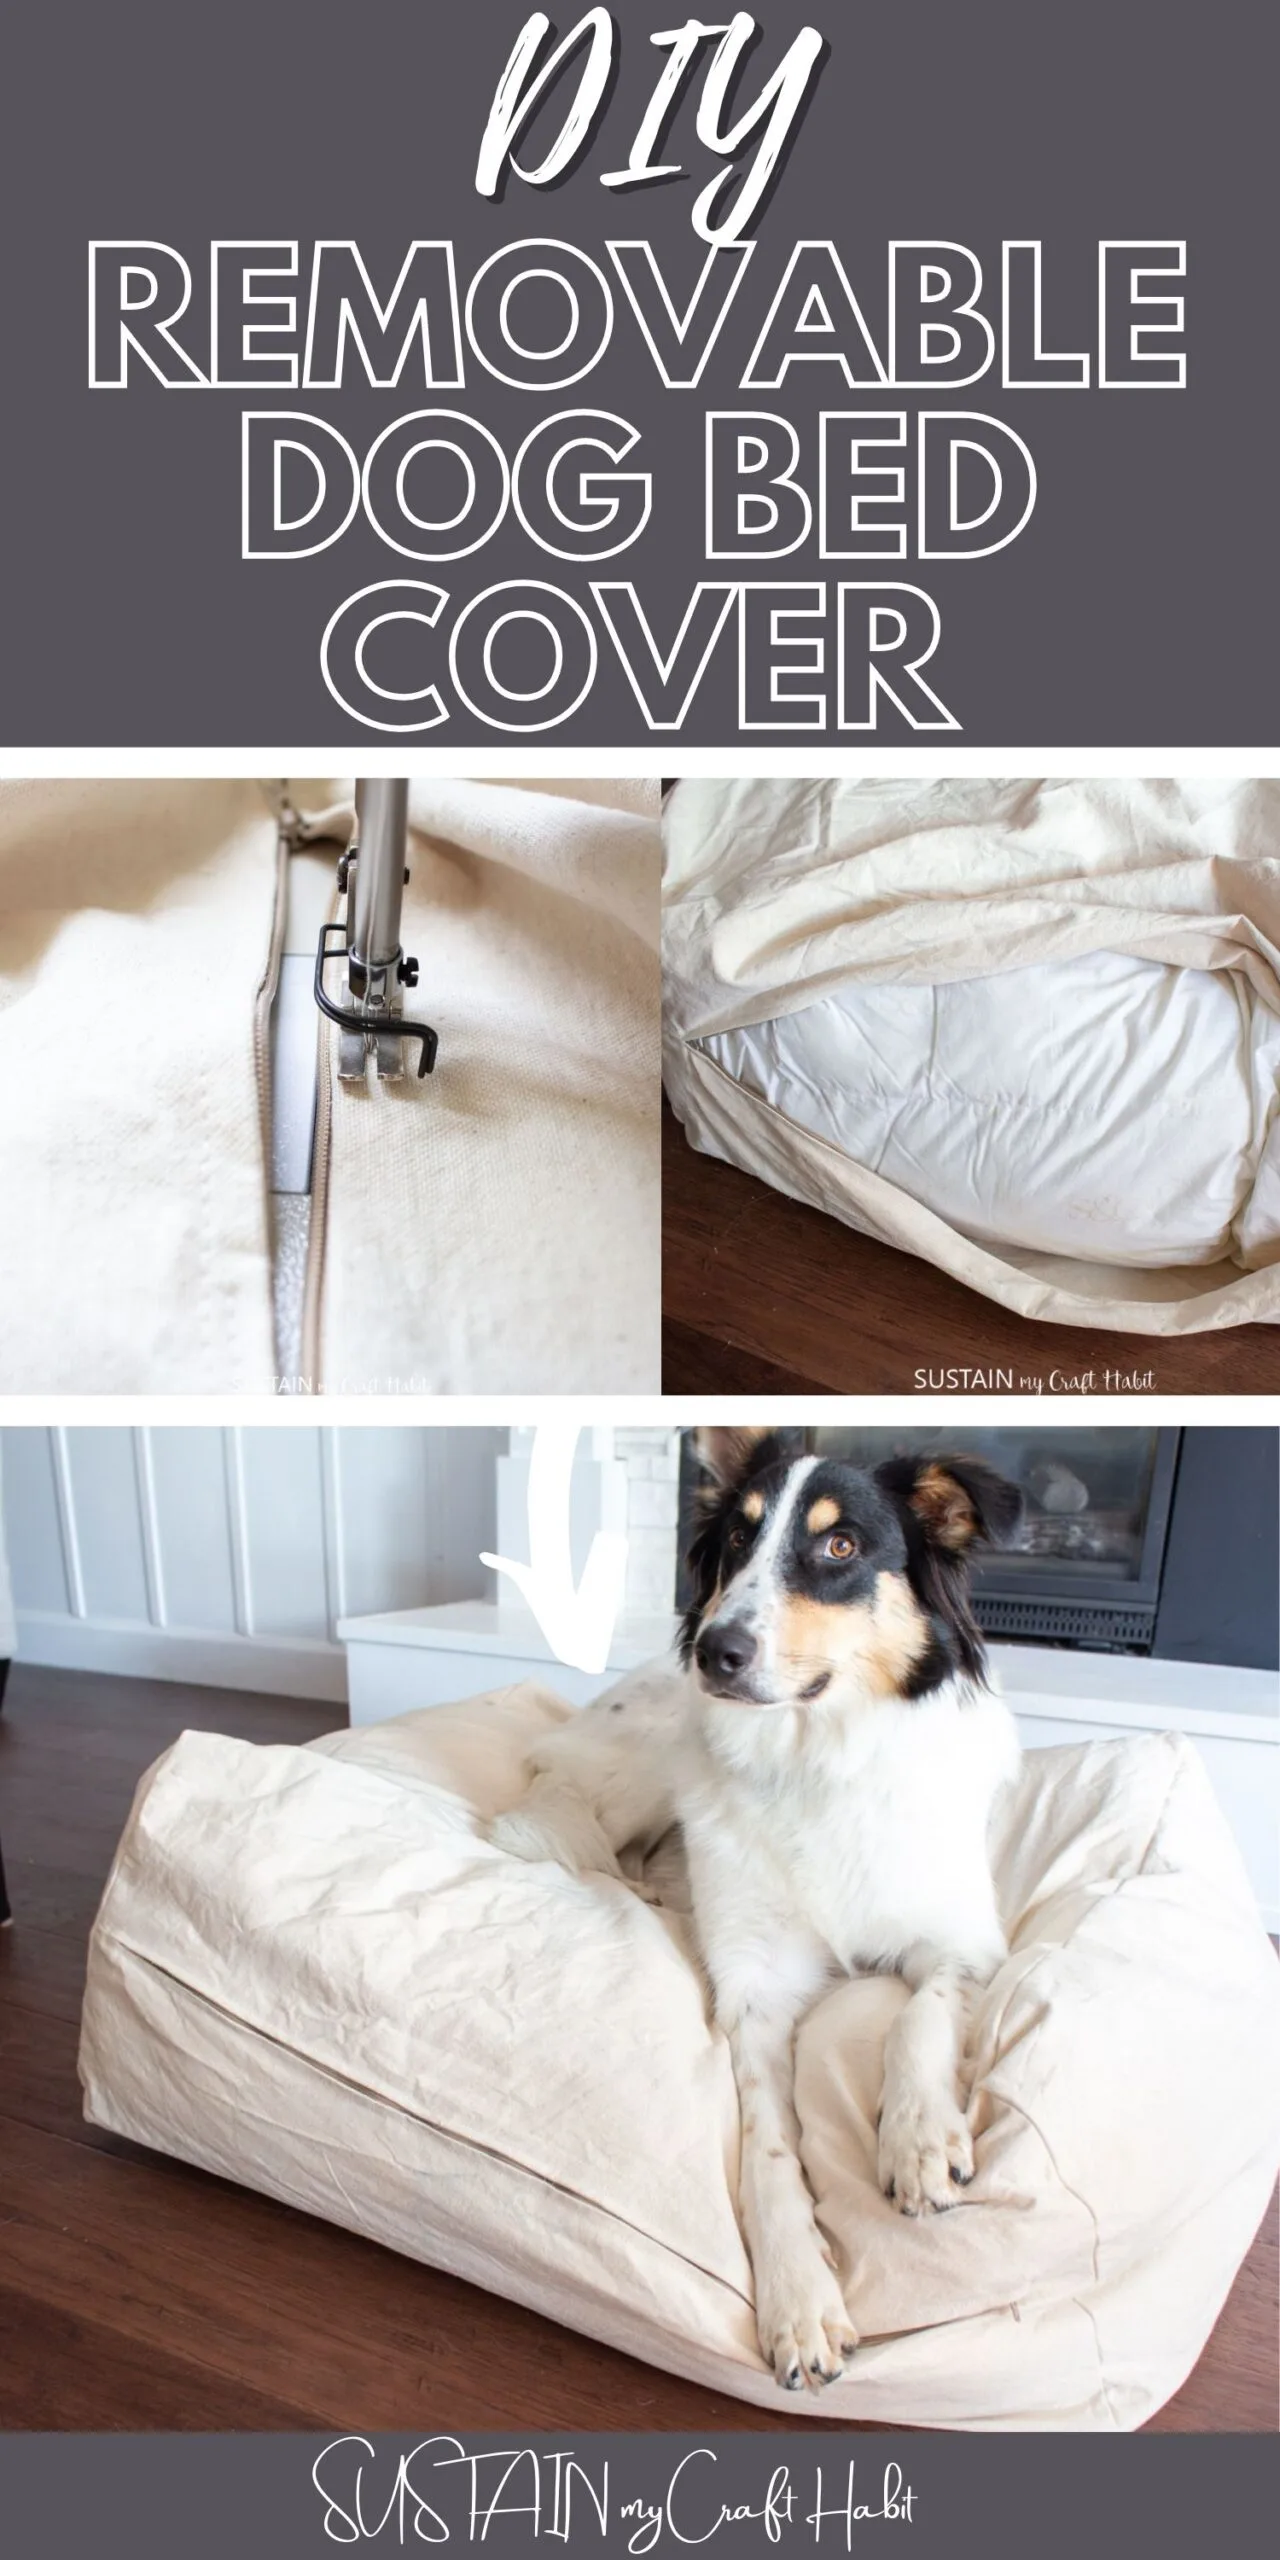 Collage of images as examples for how to make a DIY dog bed cover.